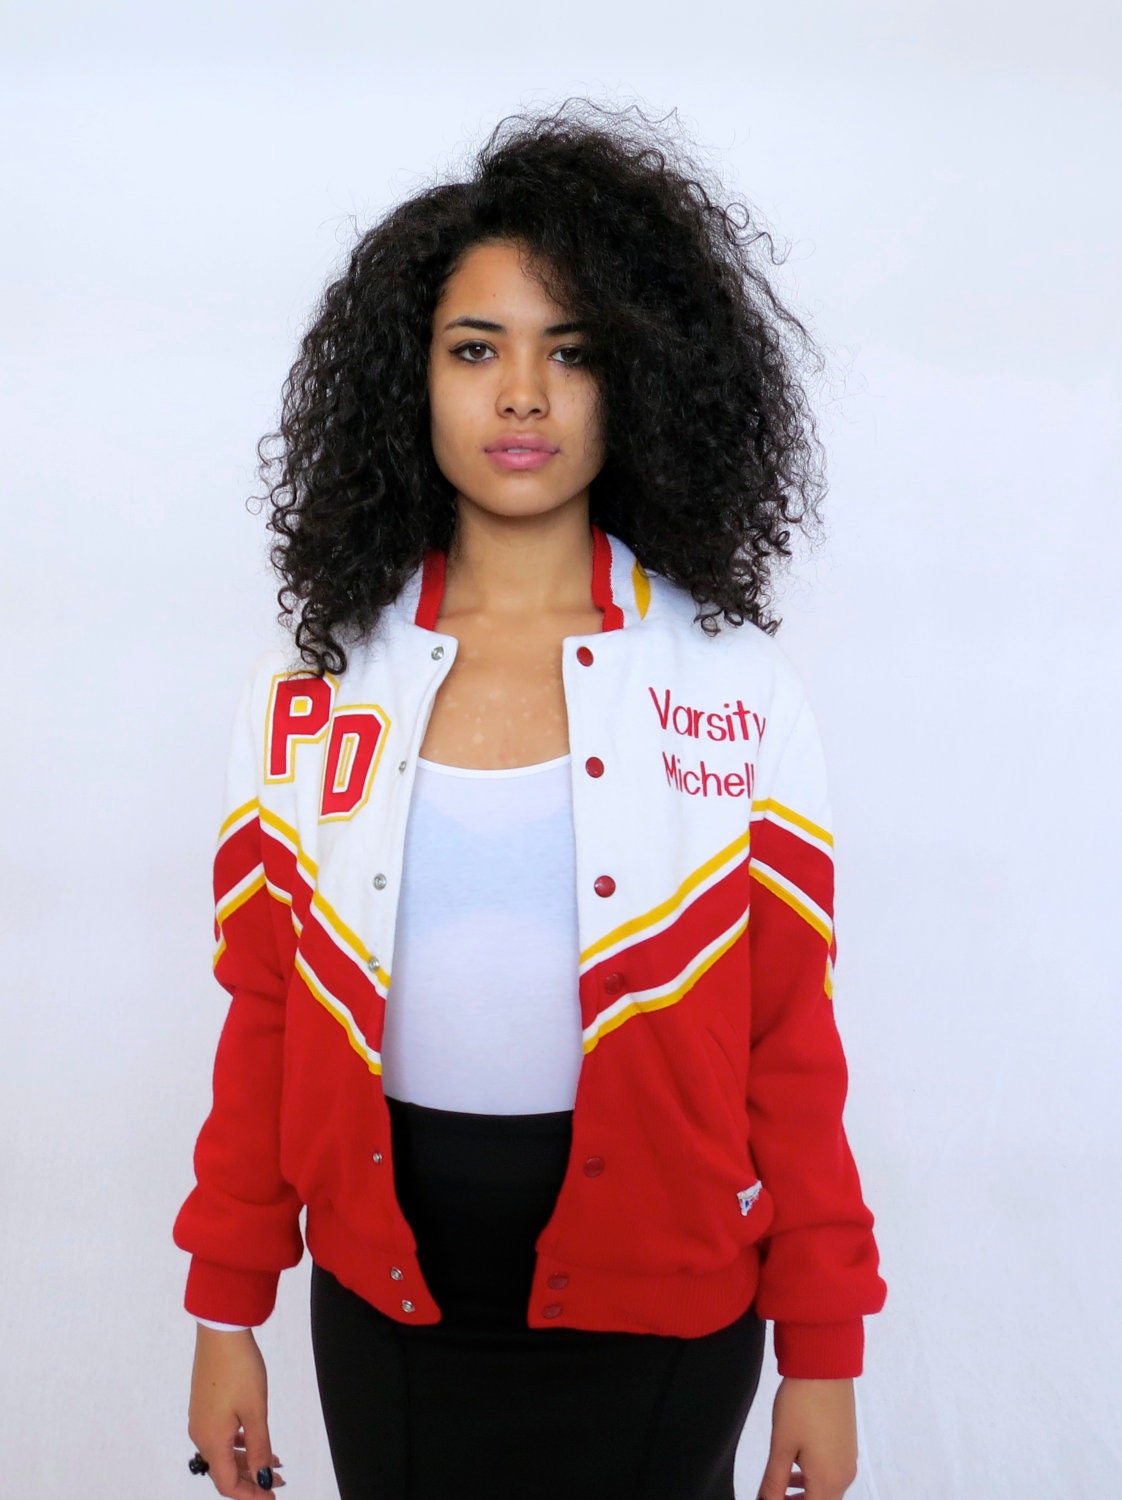 The Cheerleader Letterman Jacket by rerunvintage on Etsy